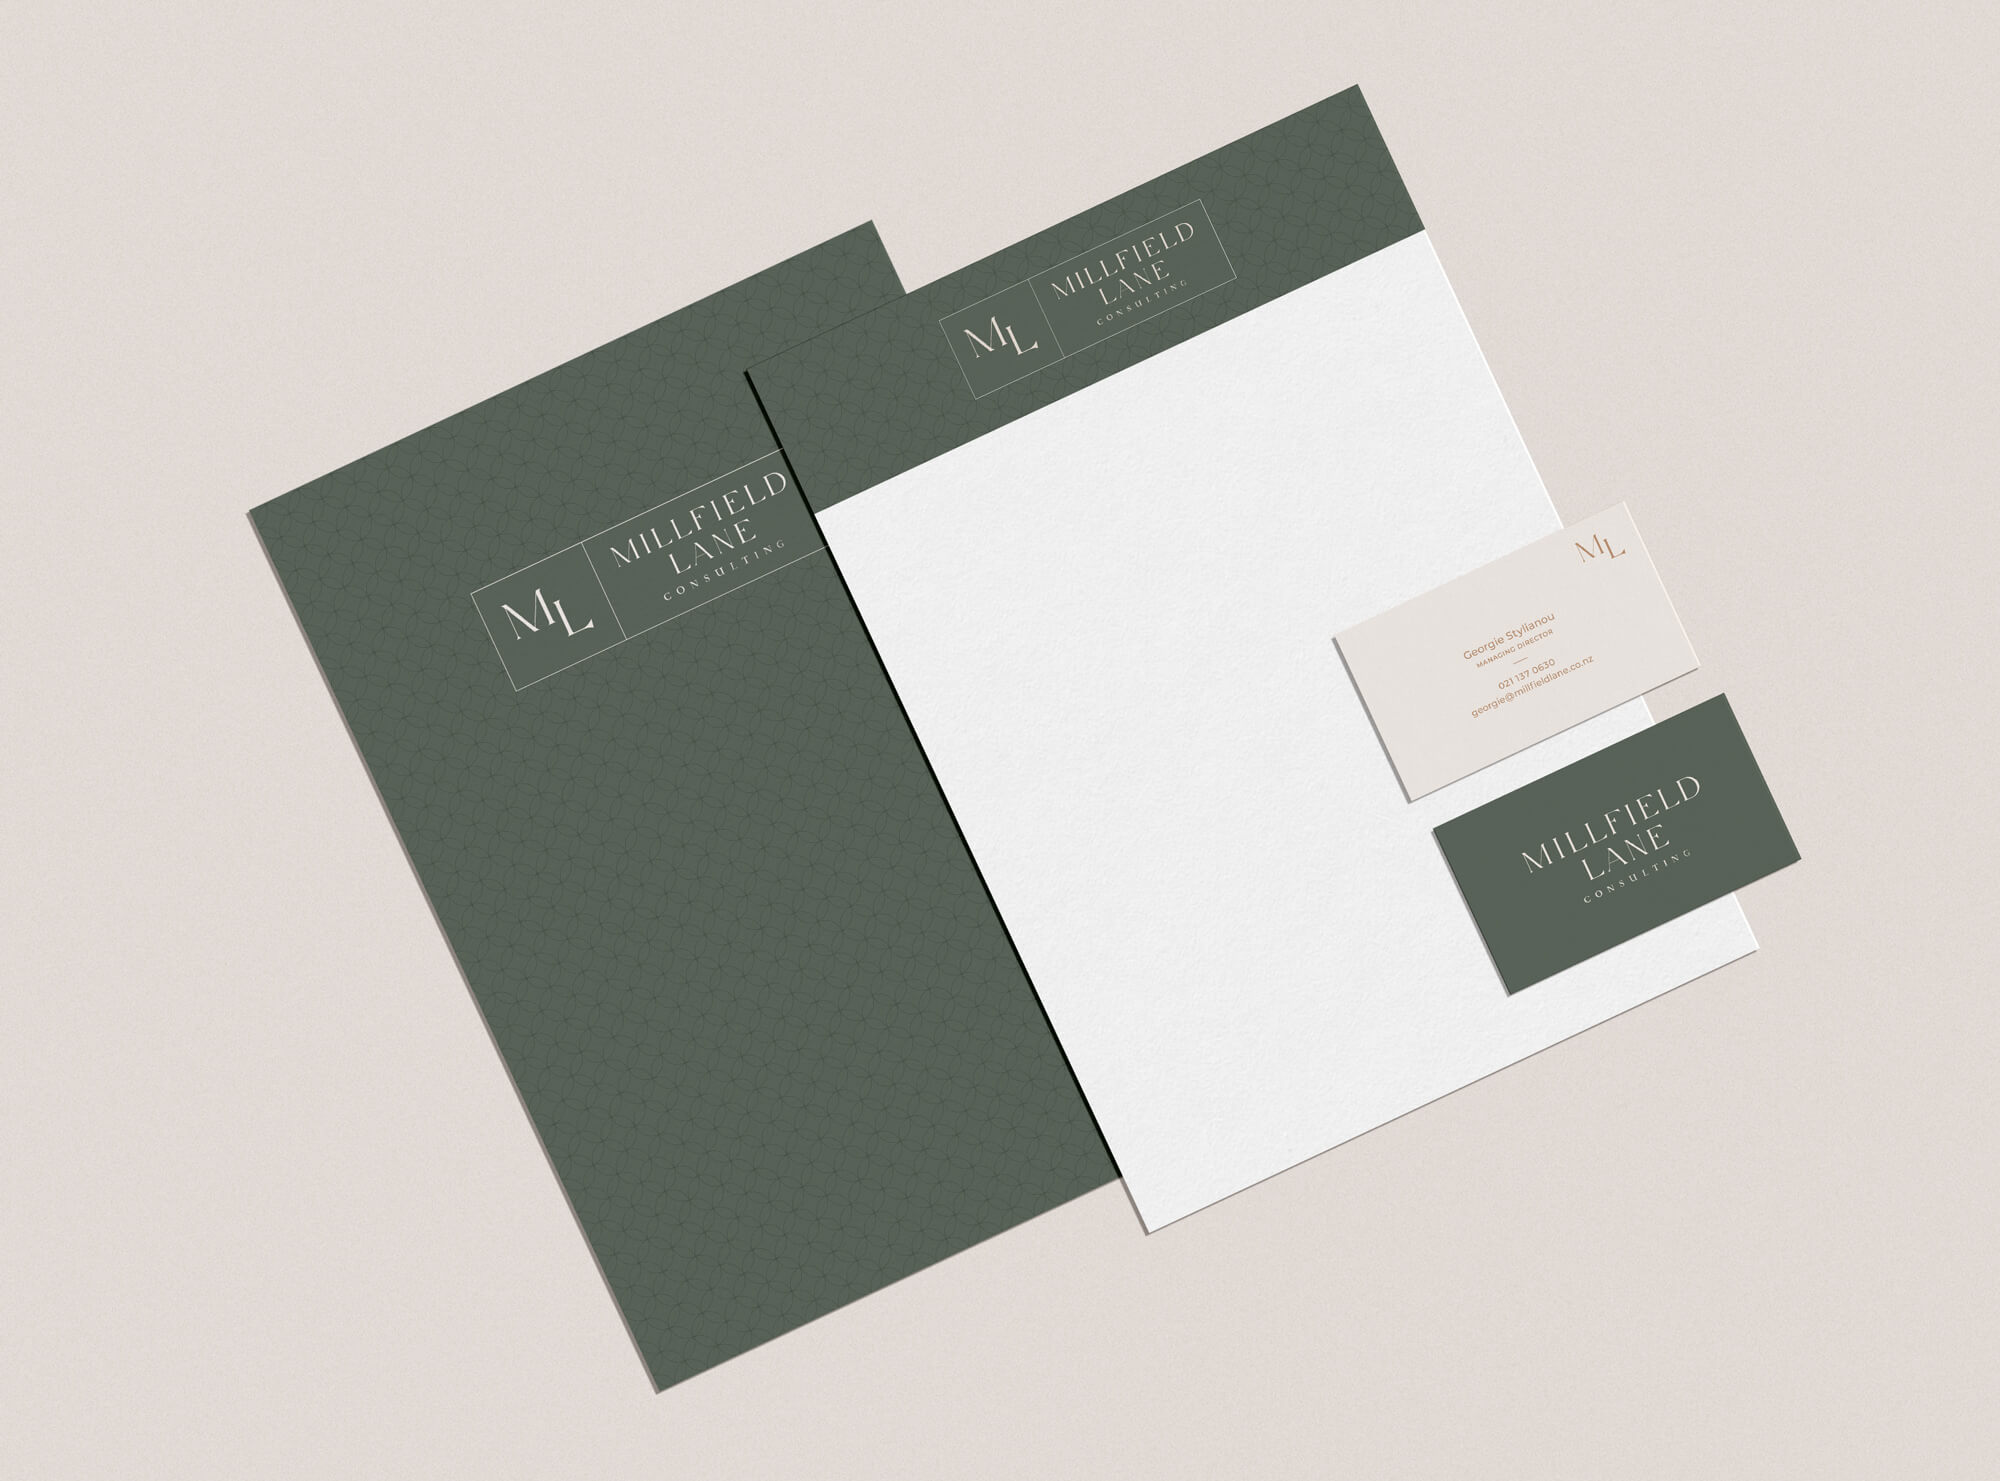 Millfield Lane Consulting stationery design